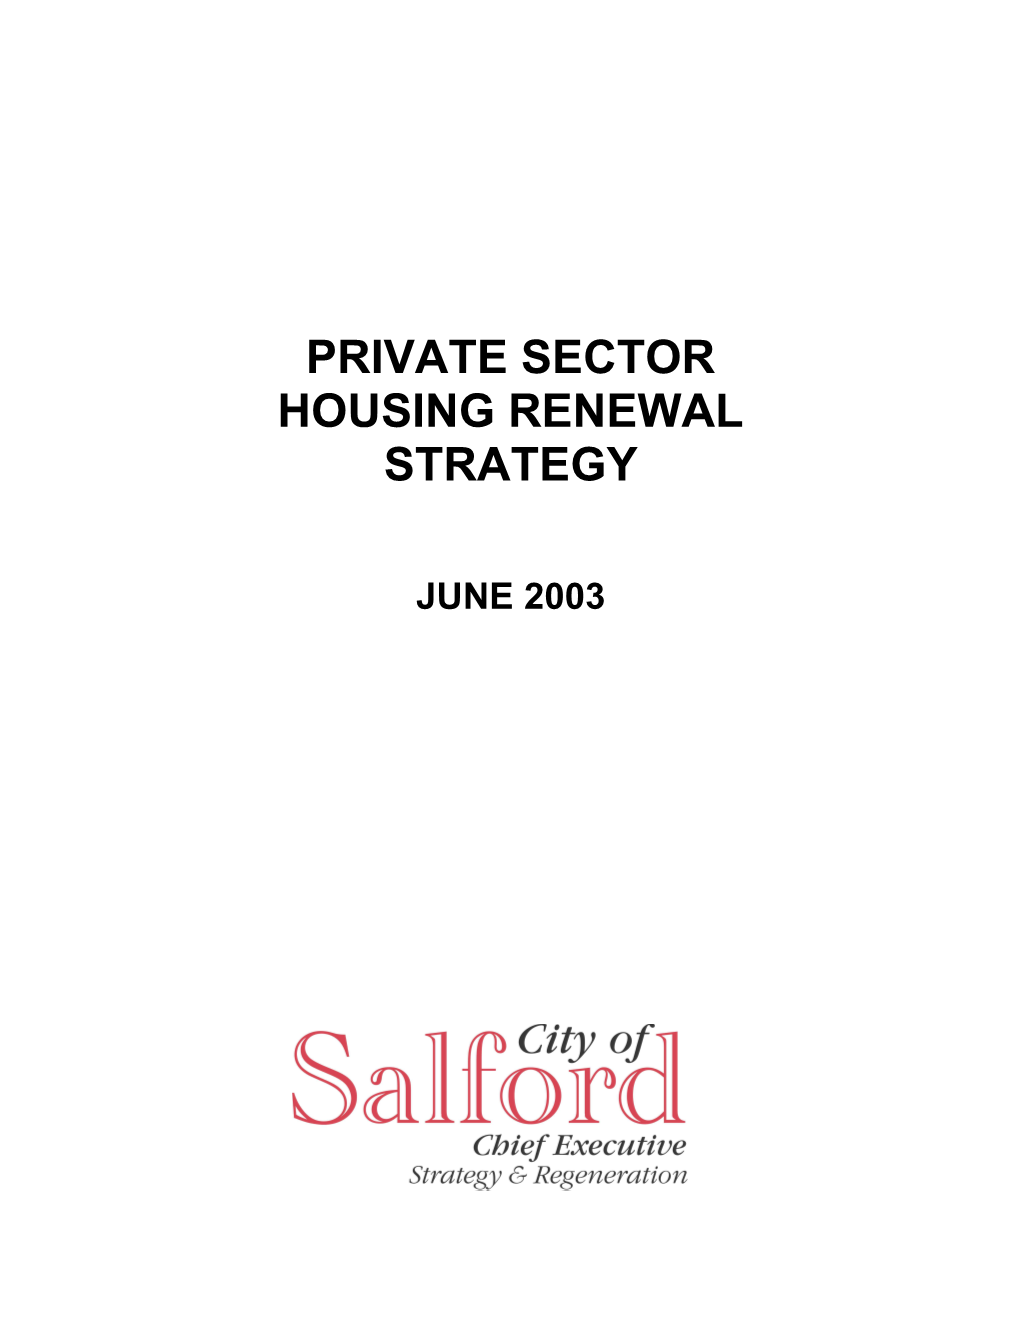 Draft Private Sector Housing Renewal Strategy